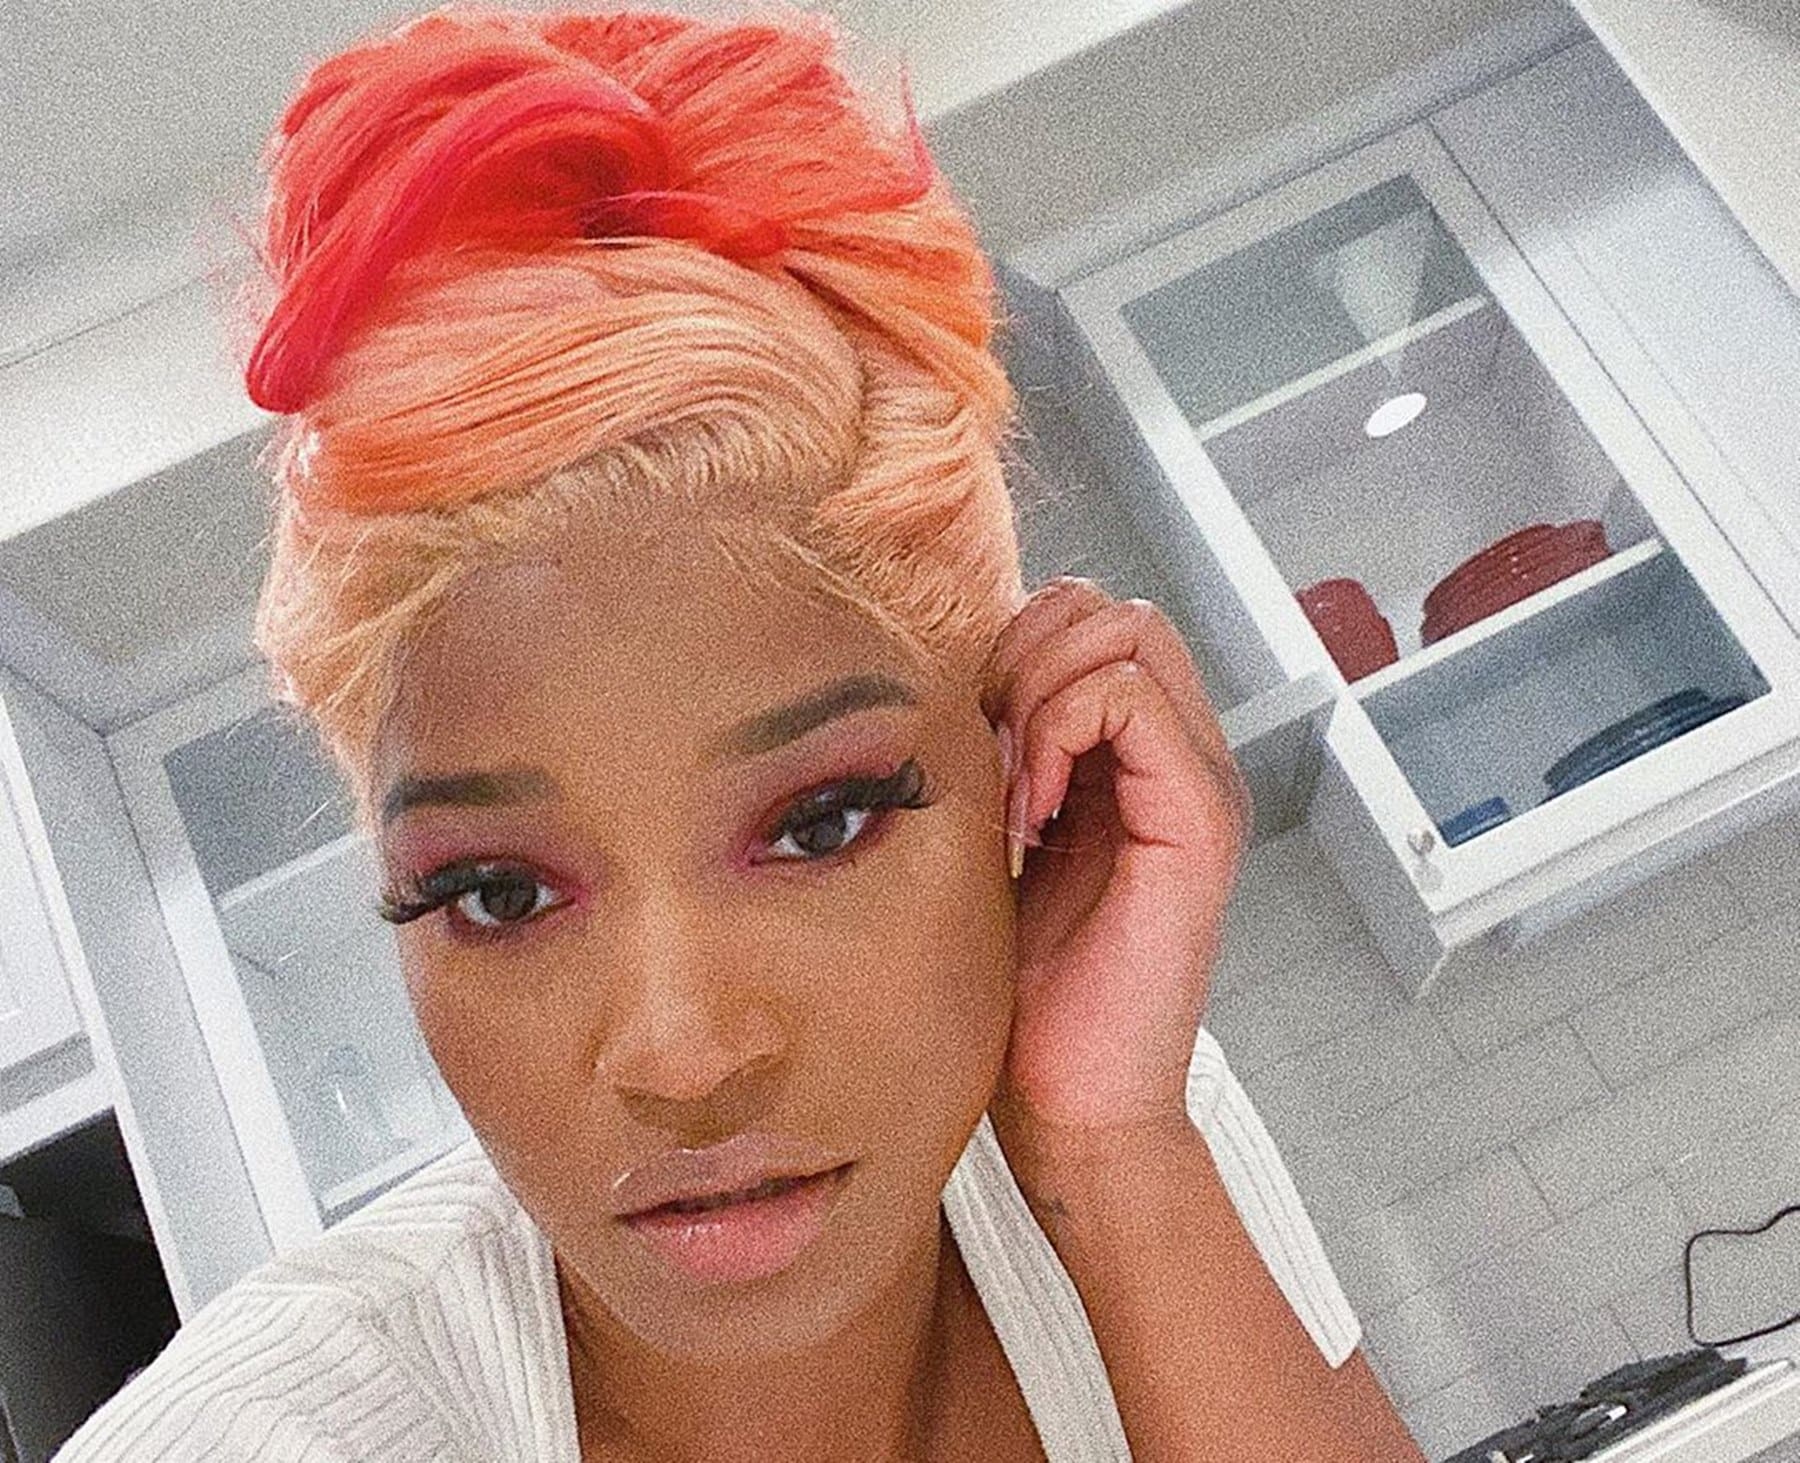 ”keke-palmer-twerks-with-orange-hair-and-epic-tattoo-in-viral-video-while-teasing-new-song-fans-defend-her-from-critics-who-say-she-is-doing-too-much-to-change-her-image”